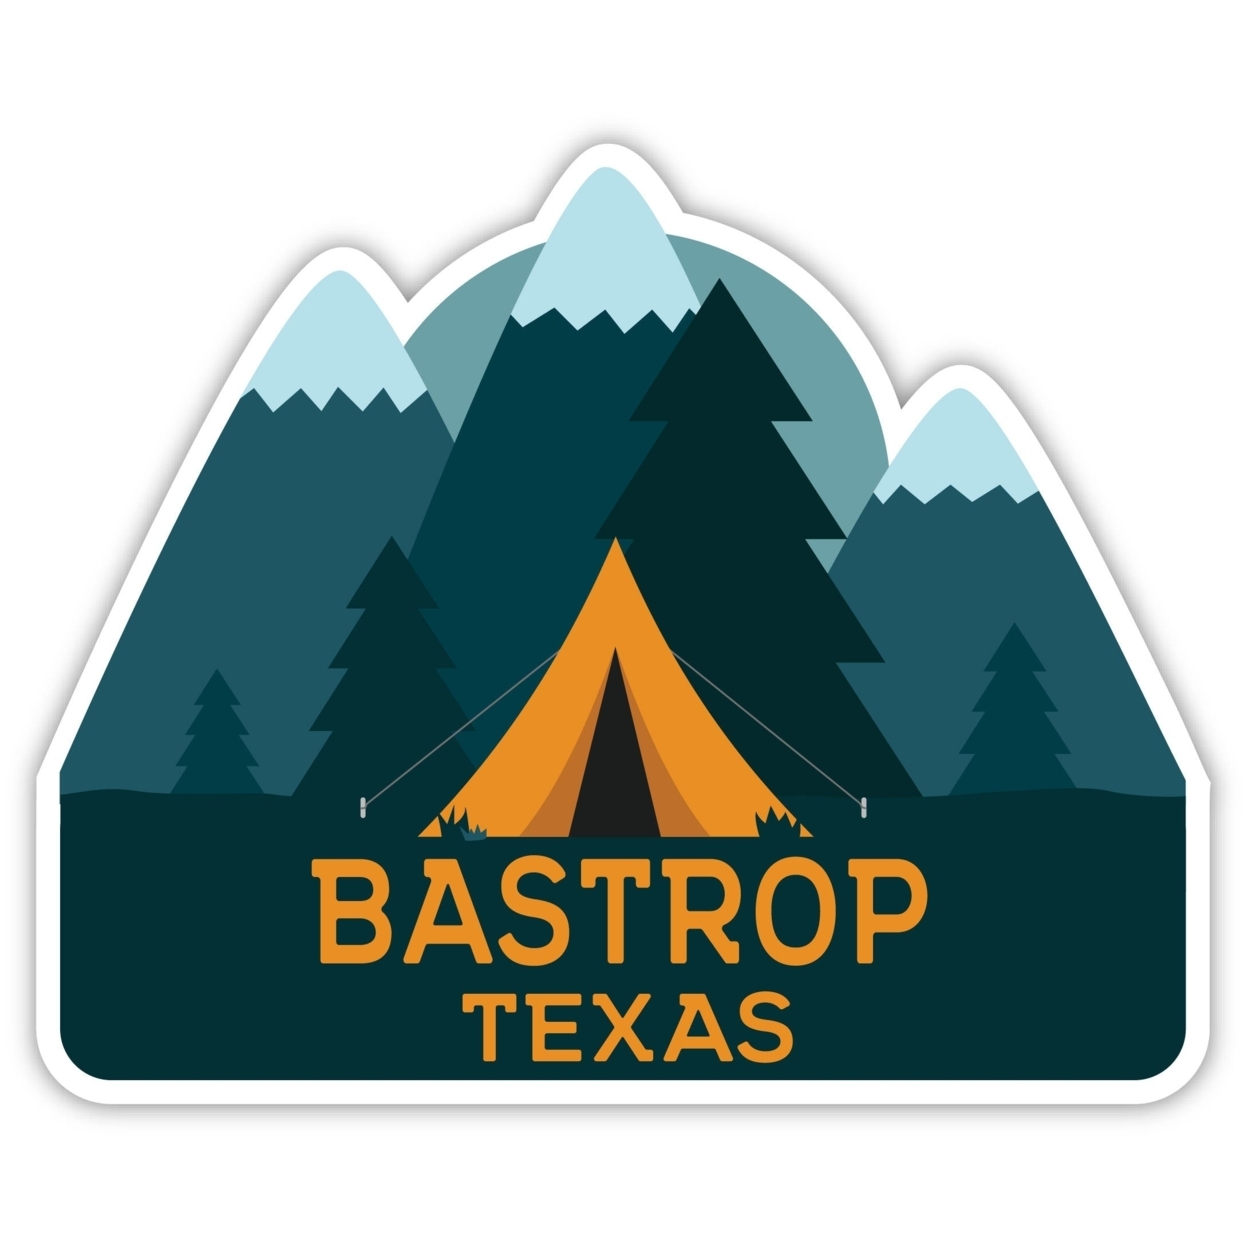 Bastrop Texas Souvenir Decorative Stickers (Choose Theme And Size) - 4-Pack, 2-Inch, Adventures Awaits